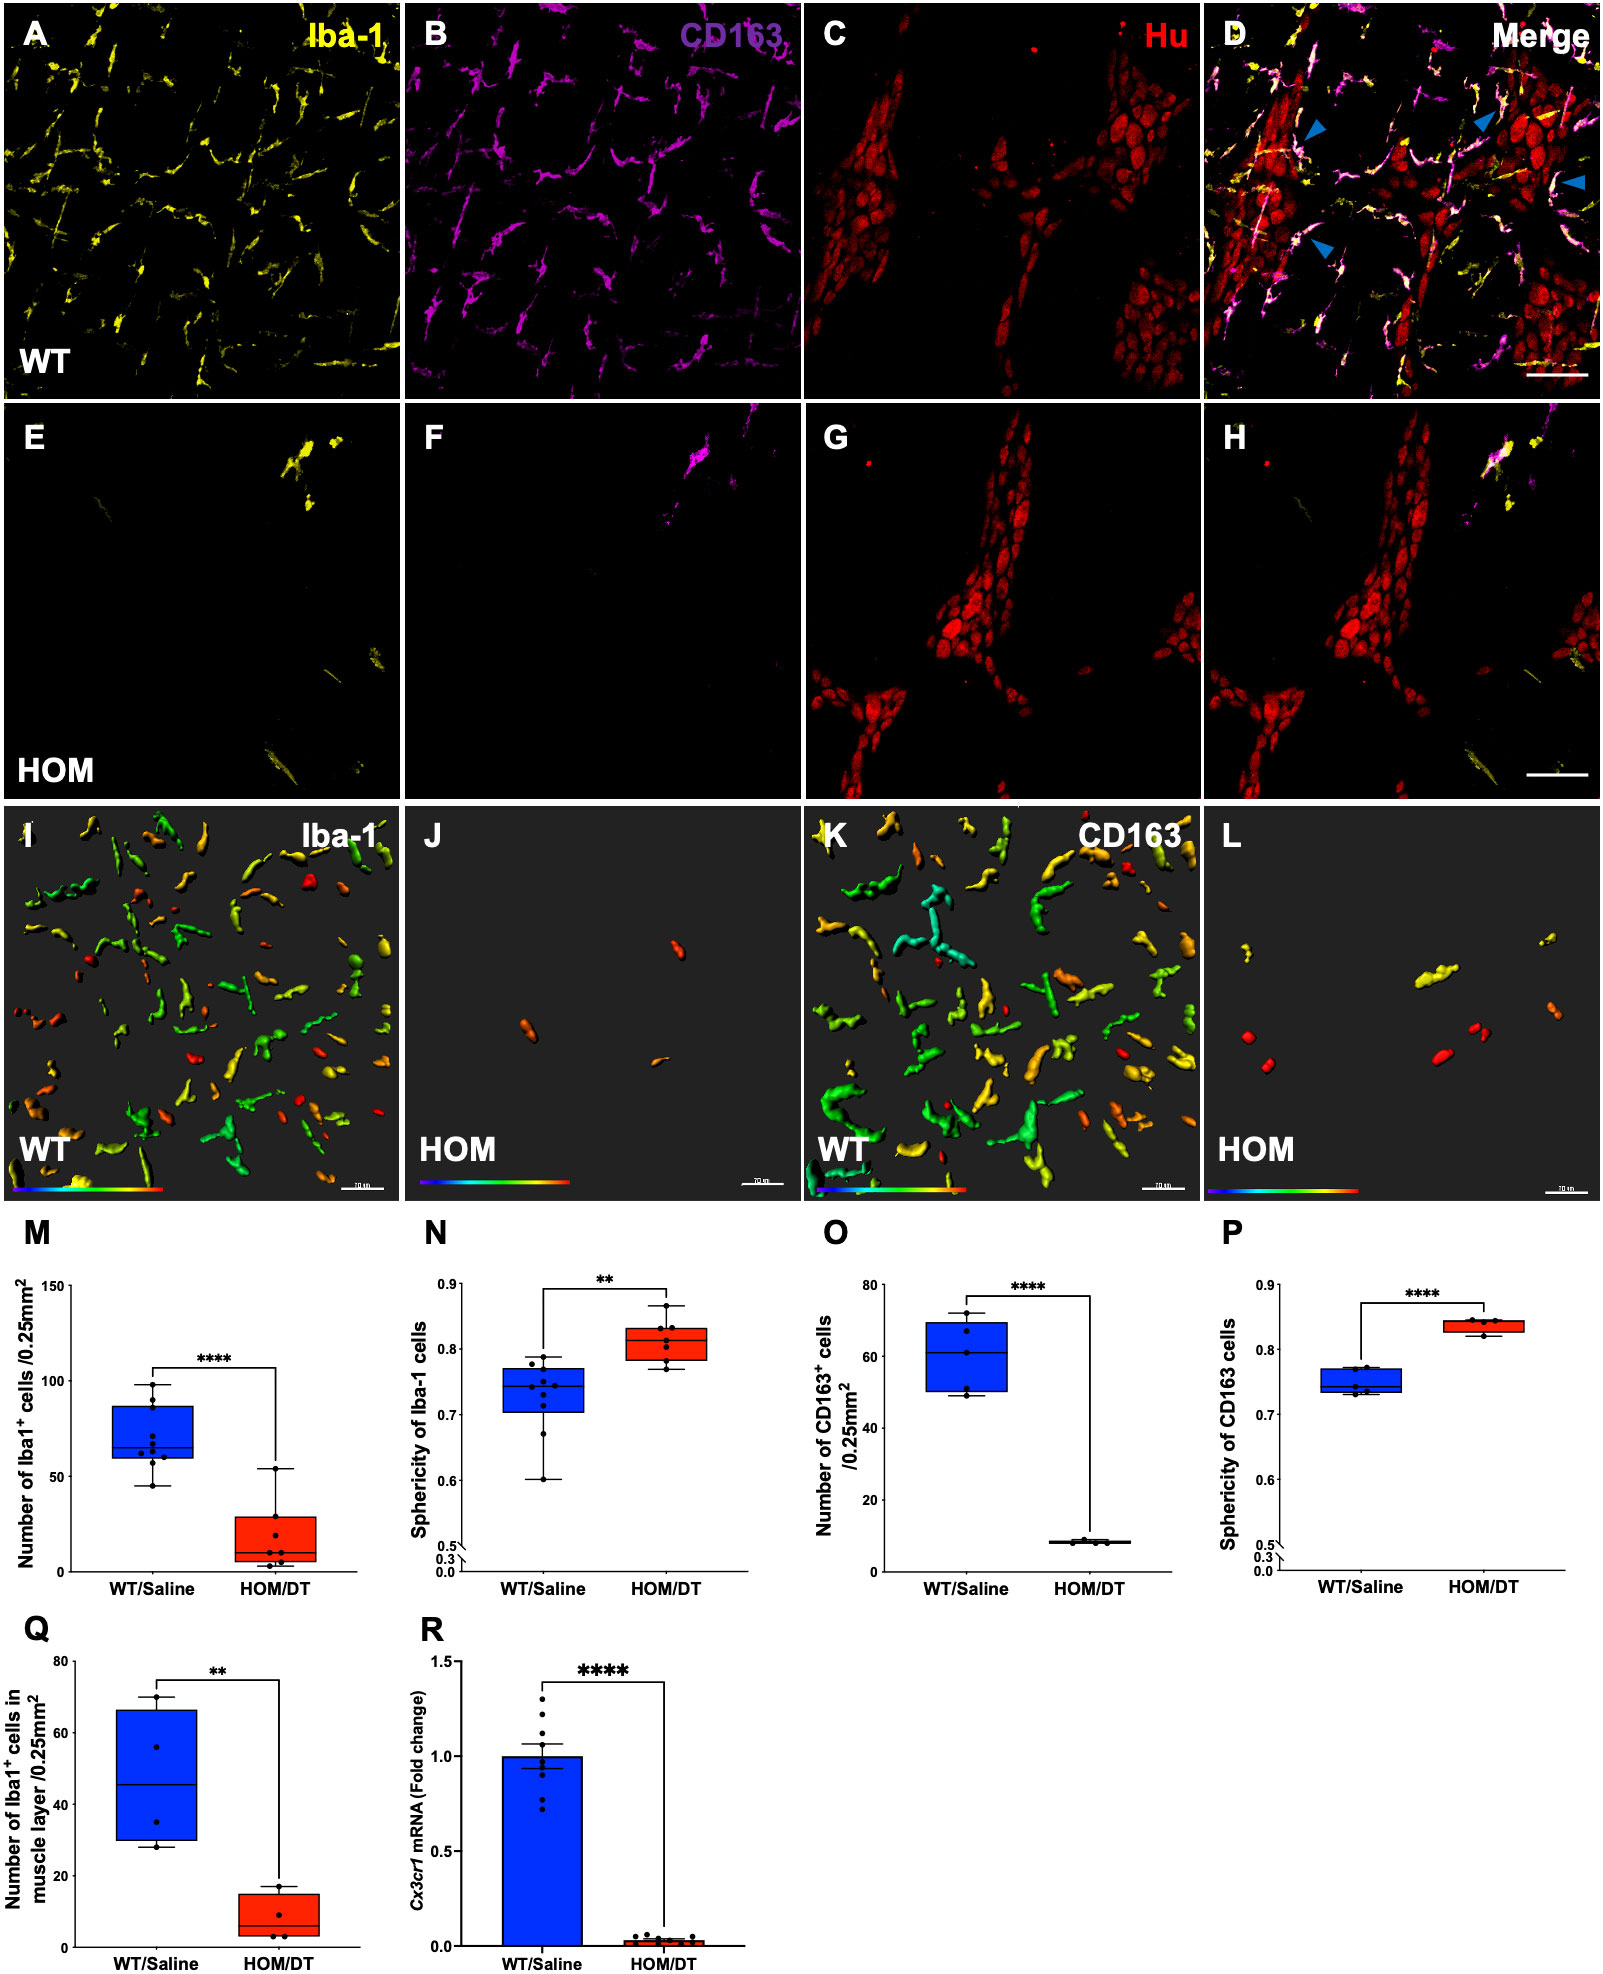 Frontiers | regulate CD163 - intestinal interact from with the of model Macrophage rat interneurons colonic “second Cx3cr1-Dtr macrophages brain”: evidence inhibitory the regulation motility to